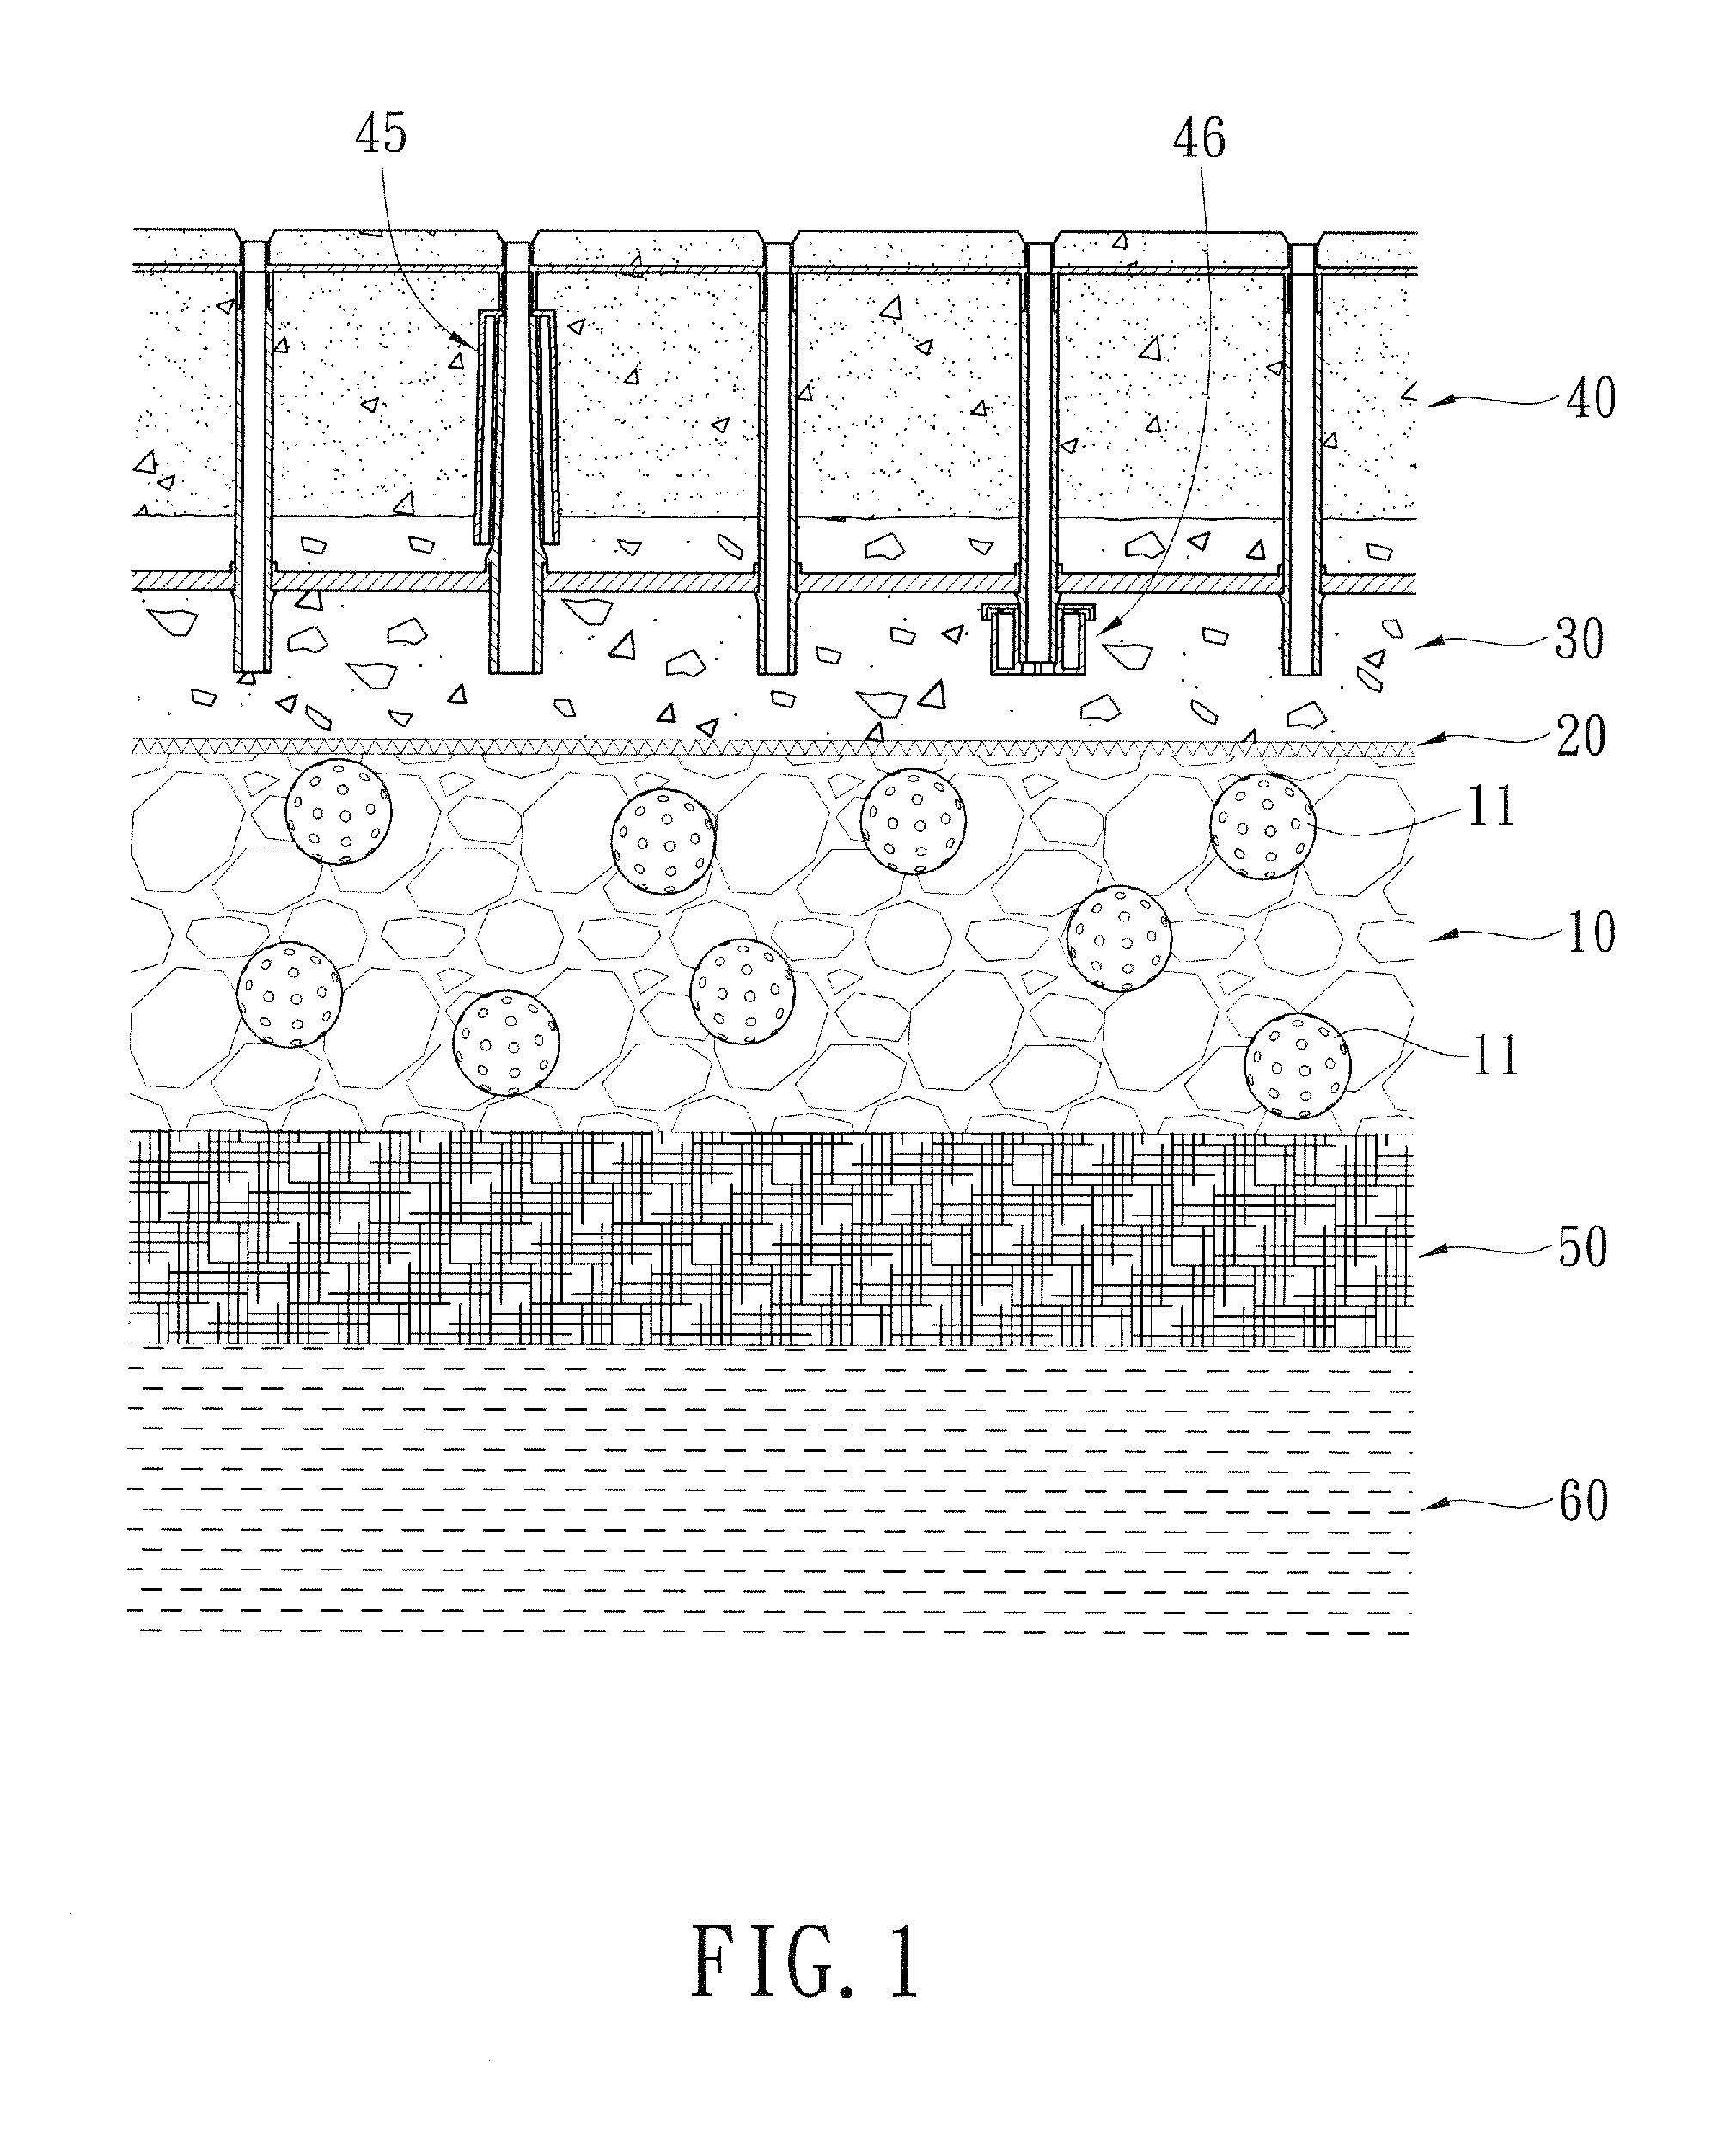 Method for manufacturing artificial paving that help improving global warming